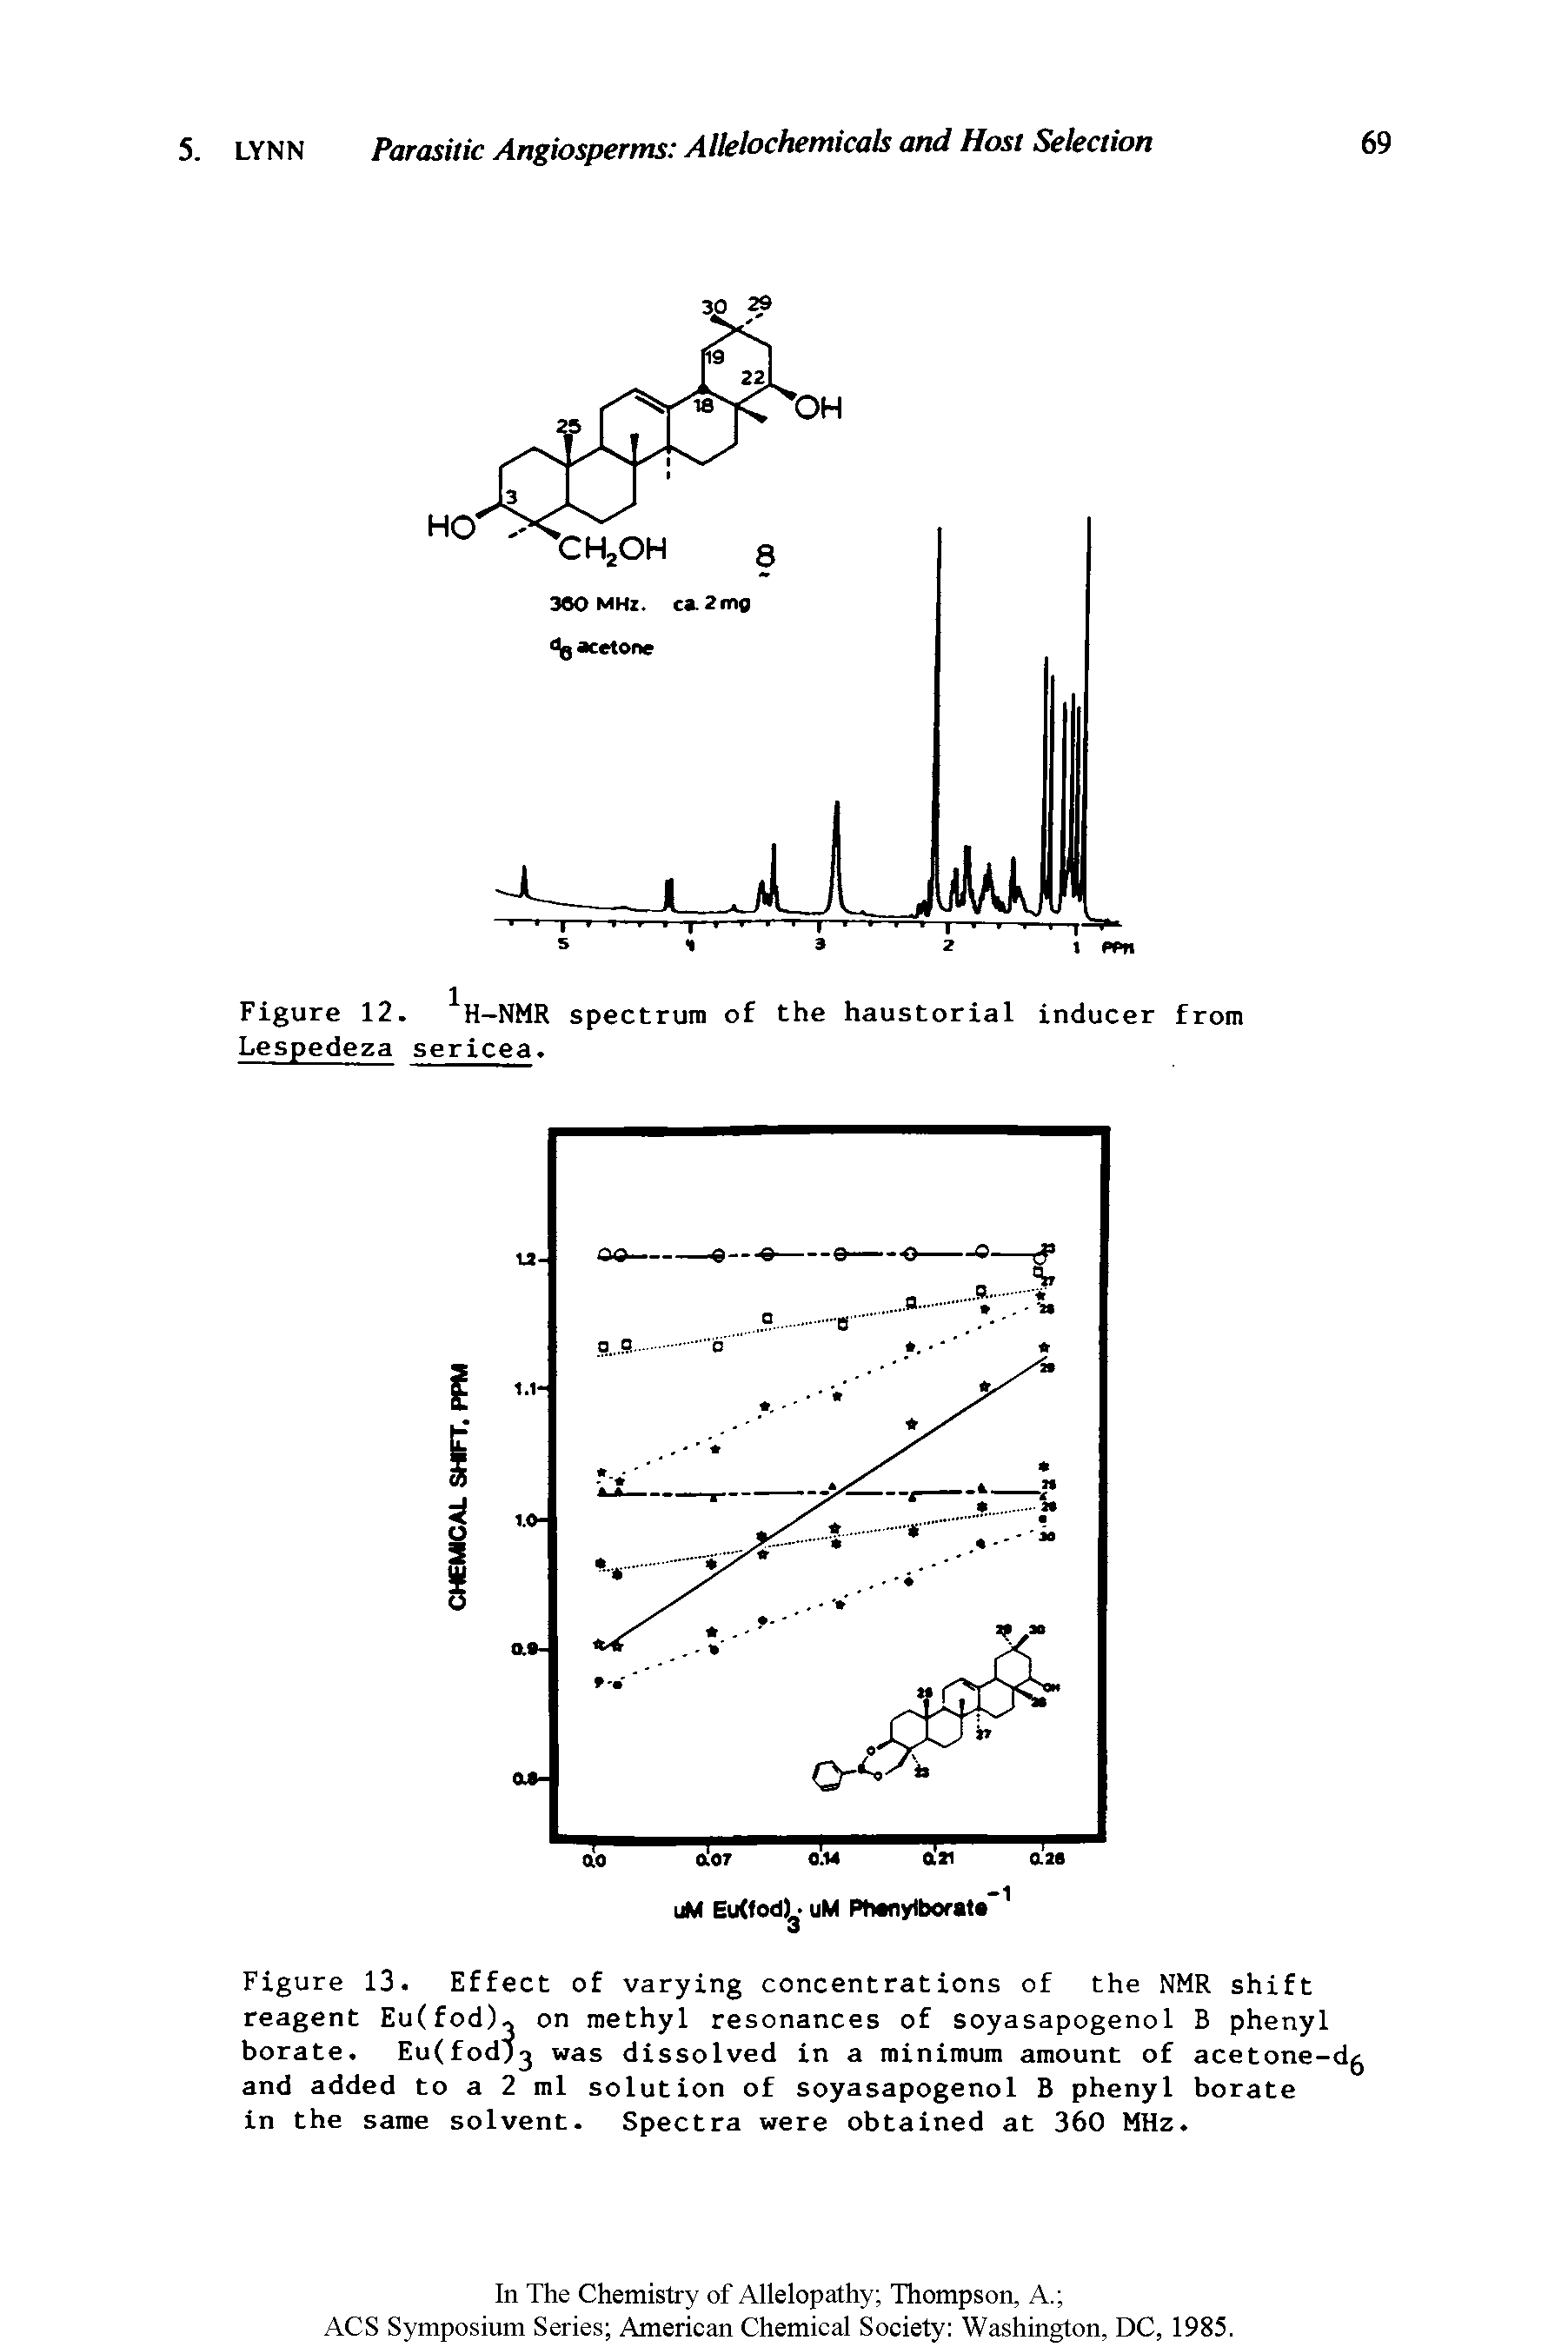 Figure 13. Effect of varying concentrations of the NMR shift reagent Eu(fod), on methyl resonances of soyasapogenol B phenyl borate. Euffodjg was dissolved in a minimum amount of acetone-dg and added to a 2 ml solution of soyasapogenol B phenyl borate in the same solvent. Spectra were obtained at 360 MHz.